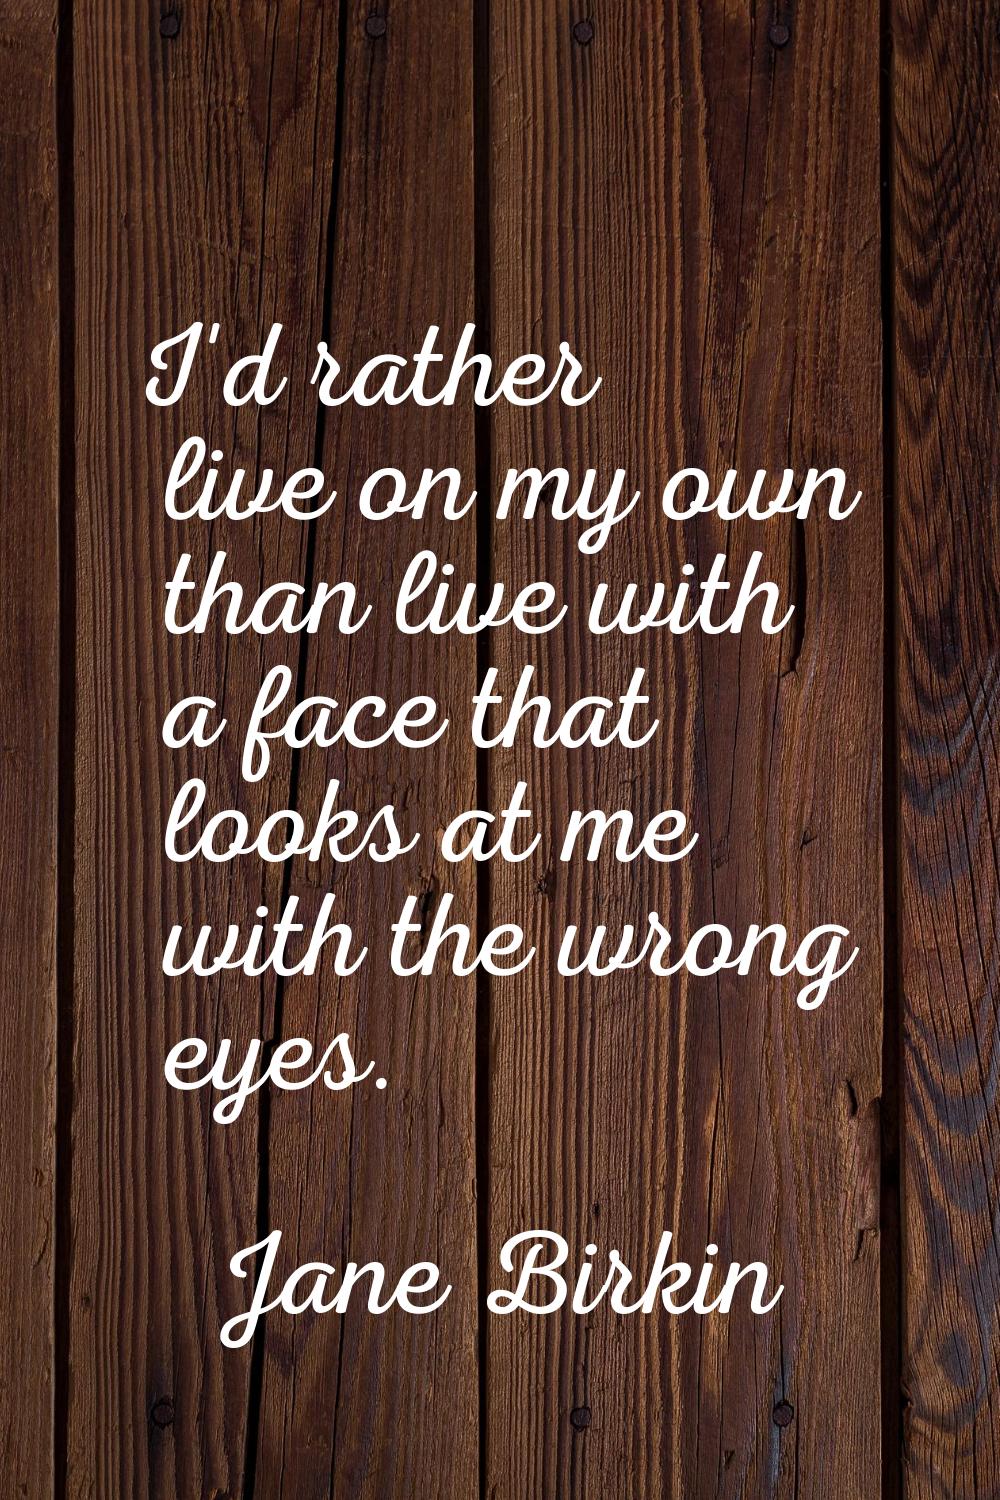 I'd rather live on my own than live with a face that looks at me with the wrong eyes.